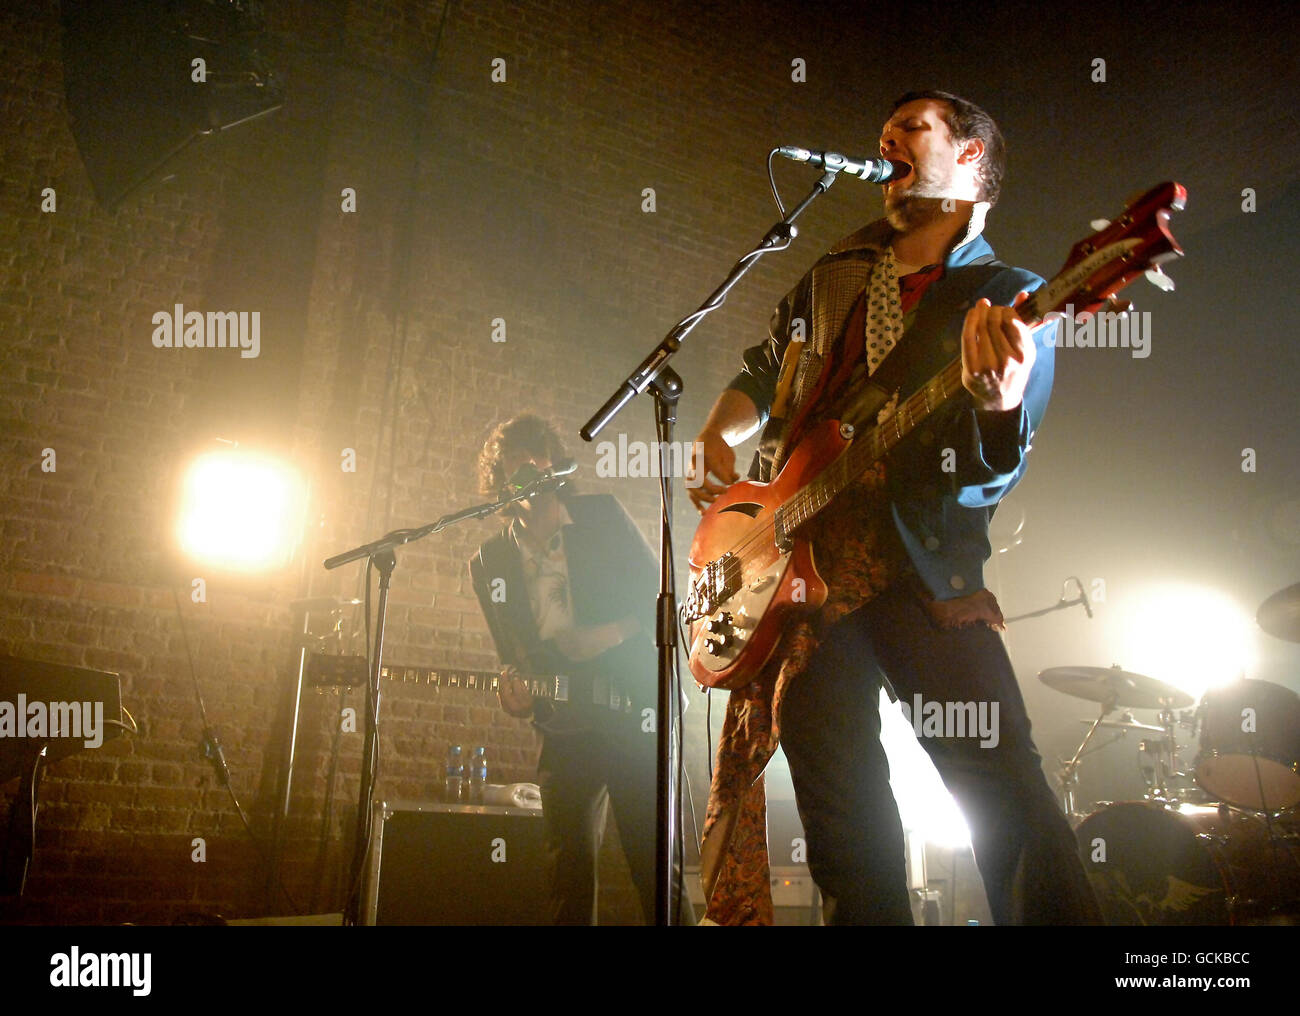 Jamie Reynolds of the Klaxons performs on stage at the Village Underground in east London. Stock Photo